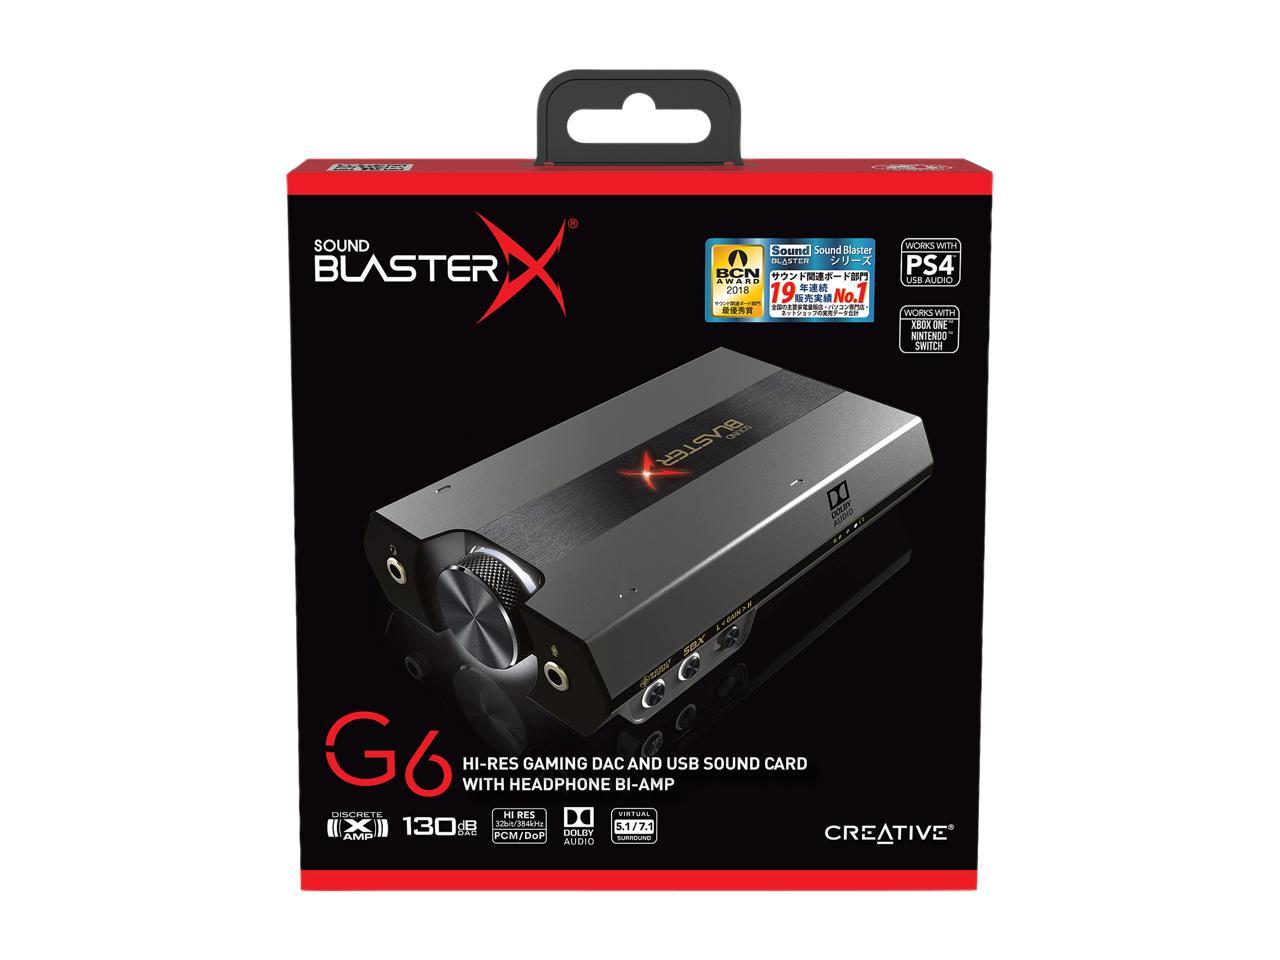 Creative Sound BlasterX G6 Hi-Res Gaming DAC and USB Sound Card with Xamp  Headphone Bi-Amplifier for PC, PS4, Xbox and Nintendo Switch